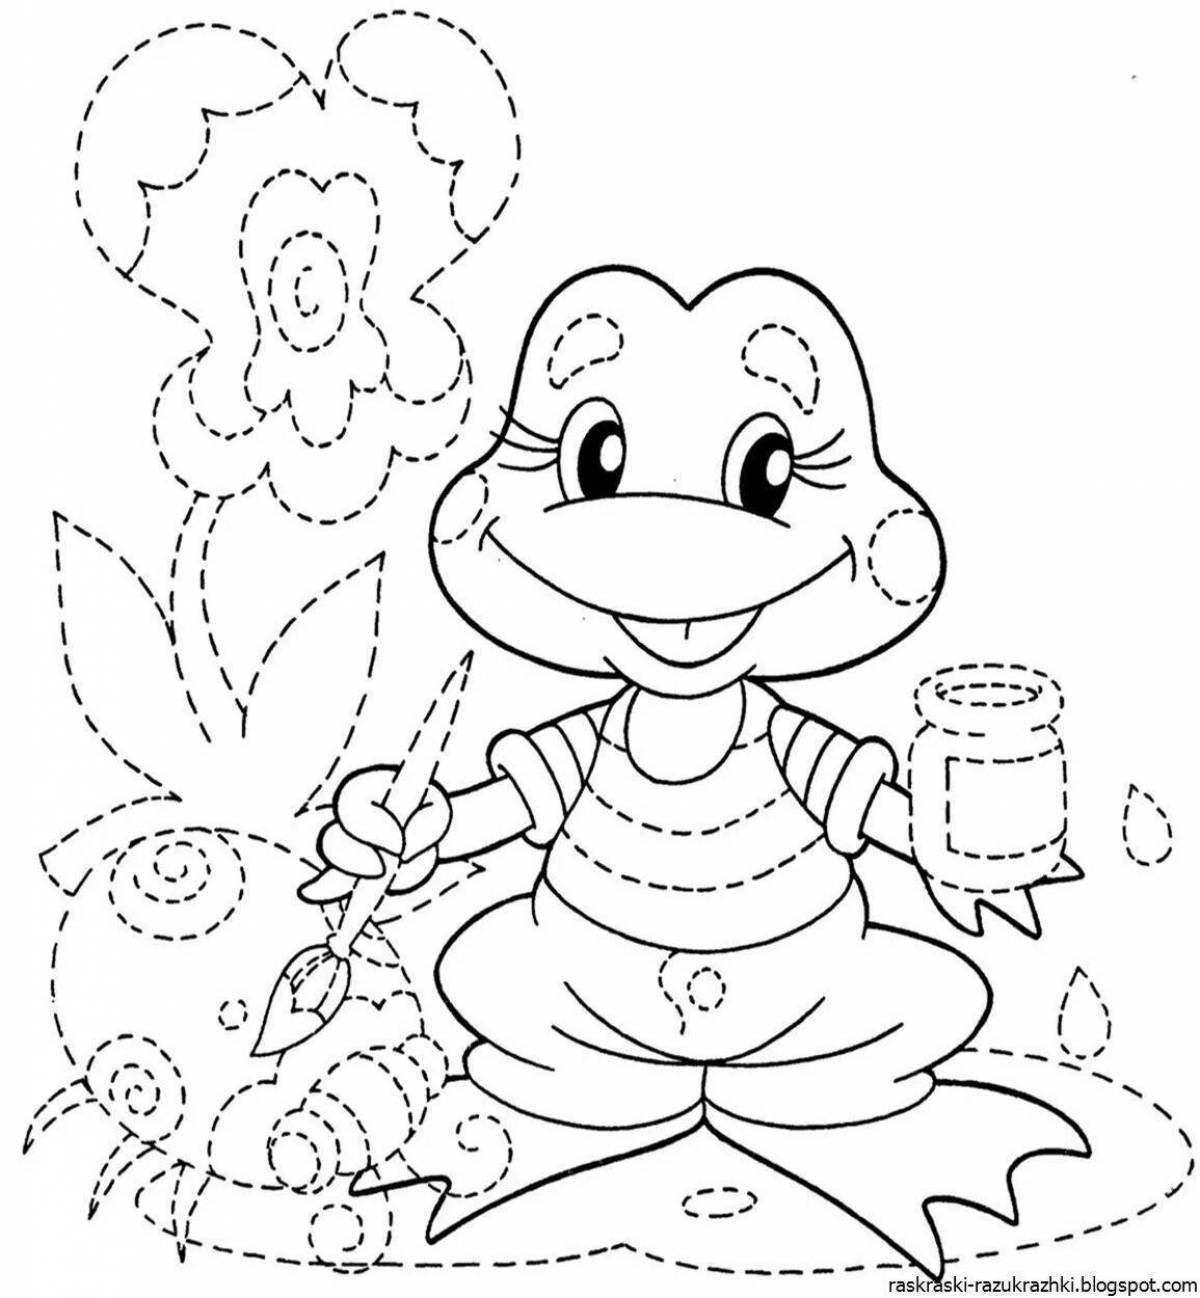 Creative coloring book for kindergarten 5-6 years old